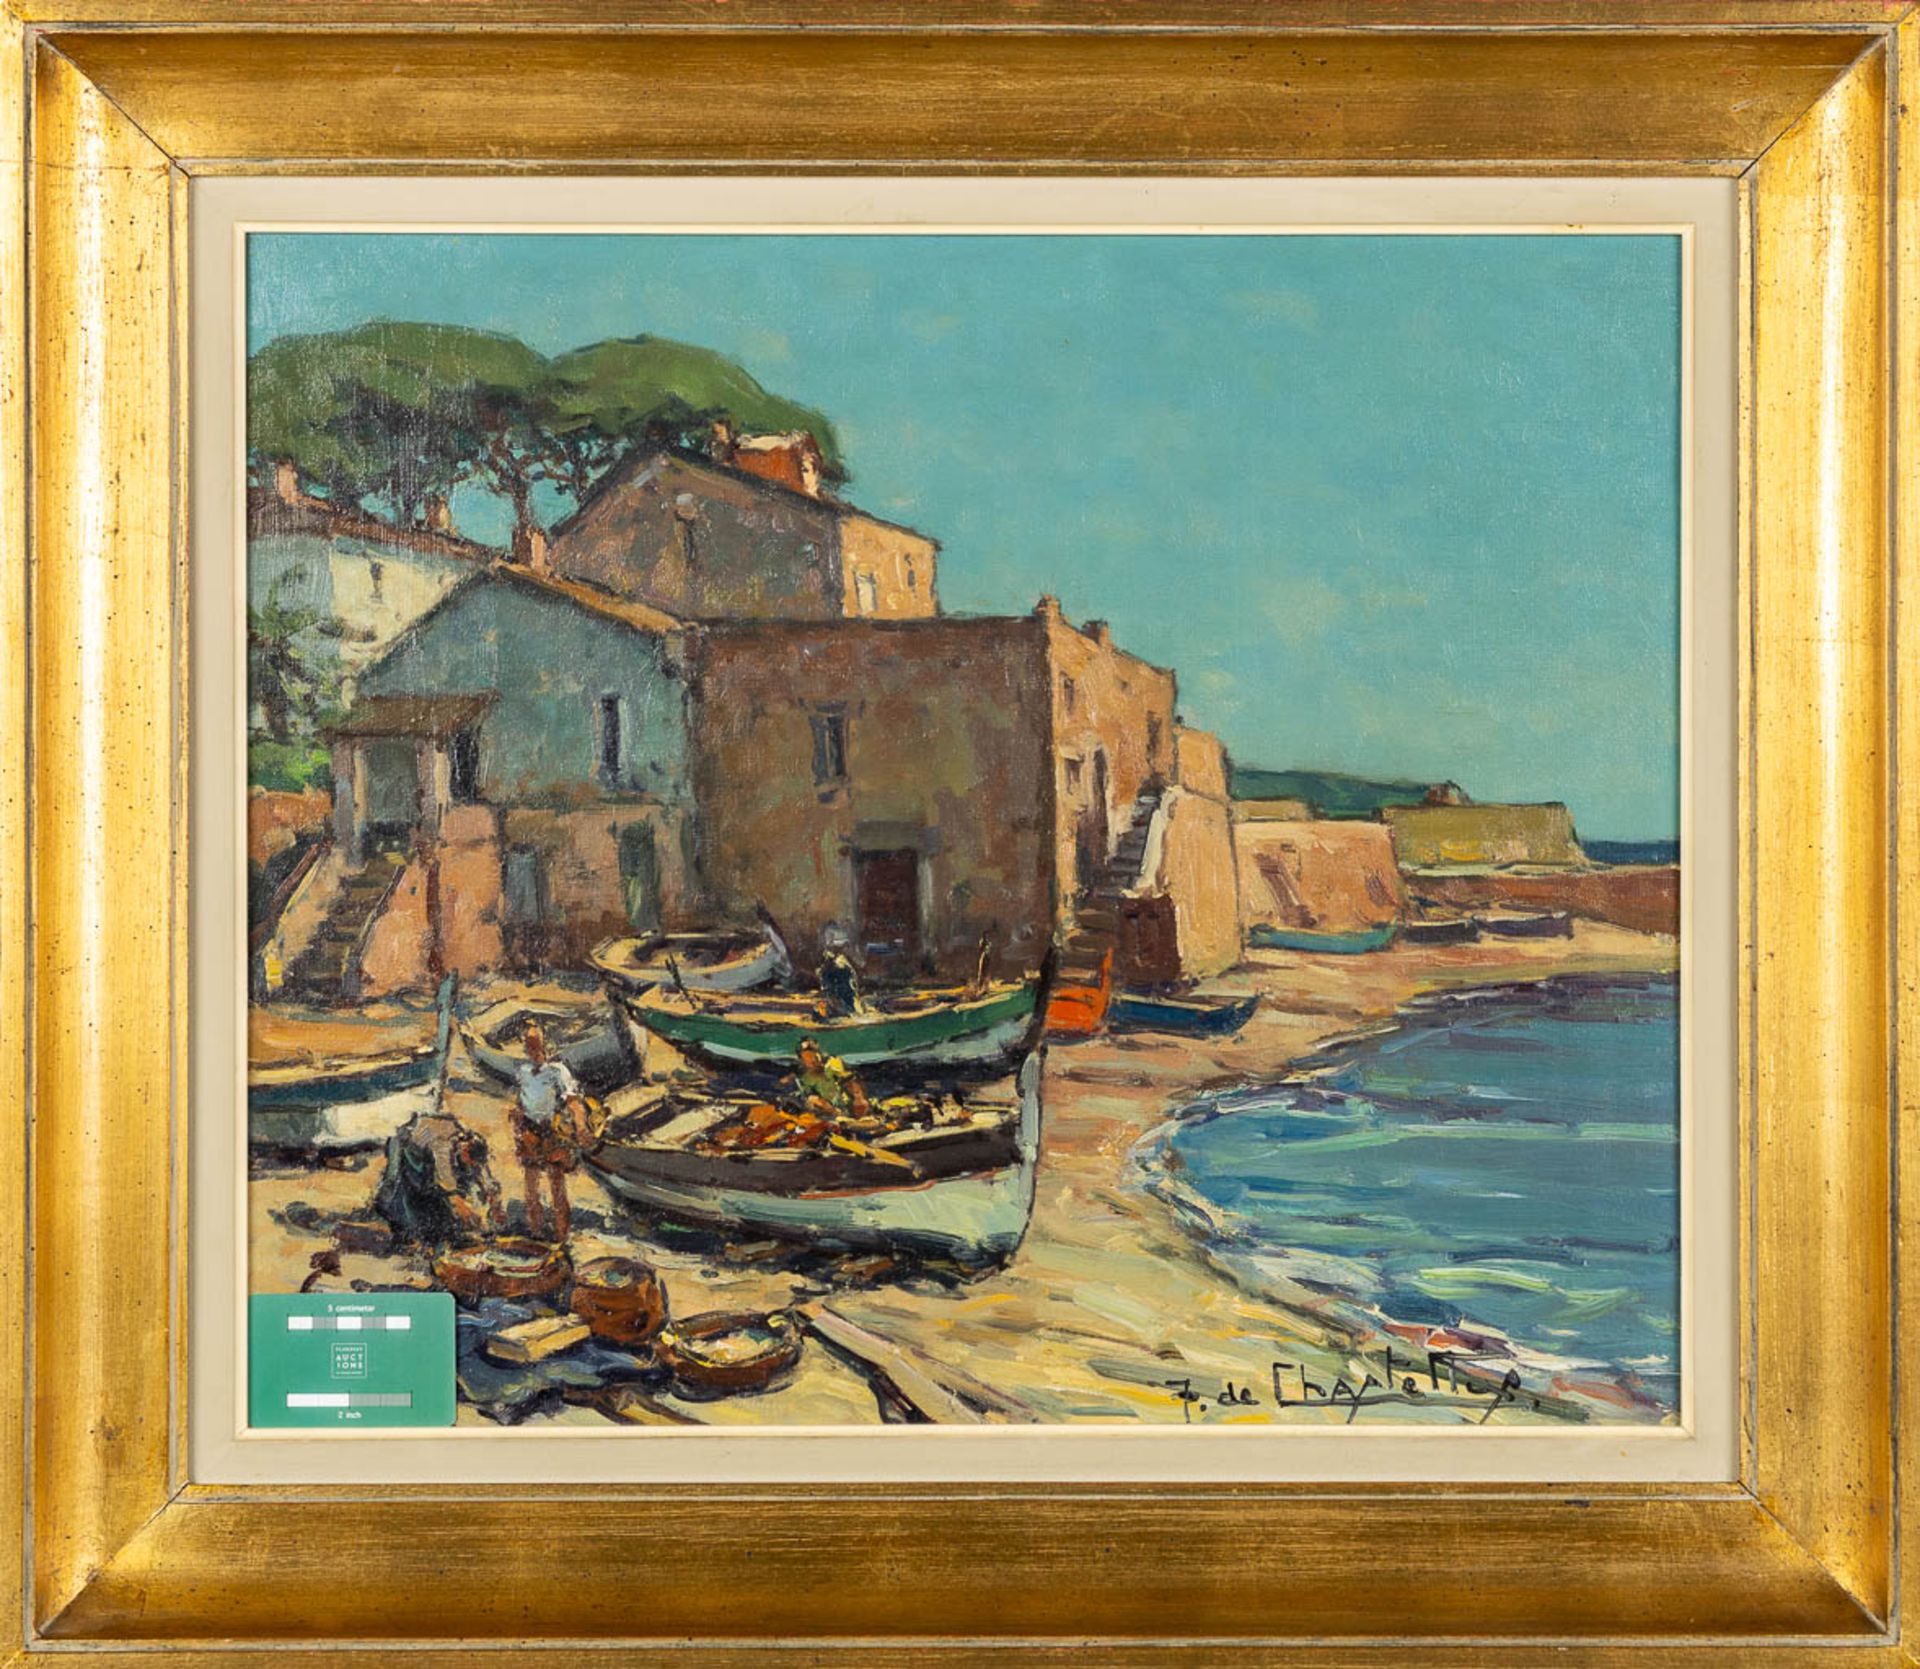 Jacques DE CHASTELLUS (1894-1957) 'Fishingboats on the beach' oil on canvas. (W:60 x H:50 cm) - Image 2 of 6